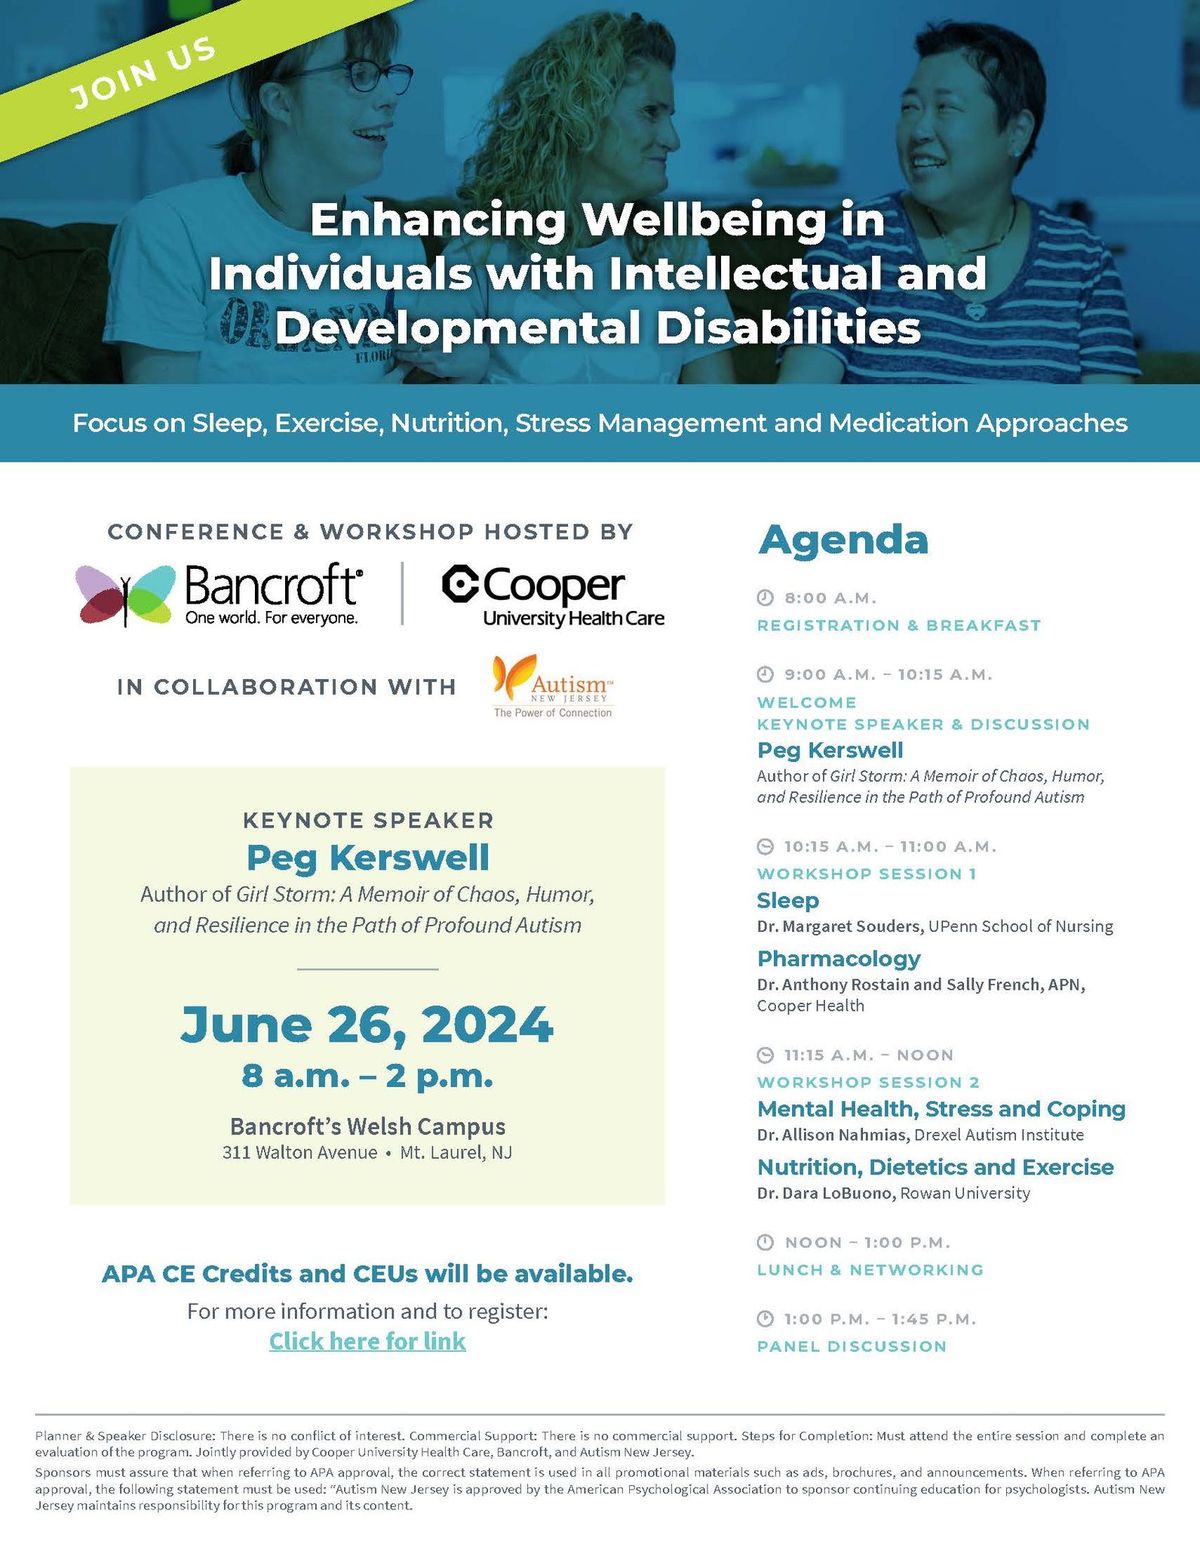 Enhancing Wellbeing in Individuals with Intellectual and Developmental Disabilities